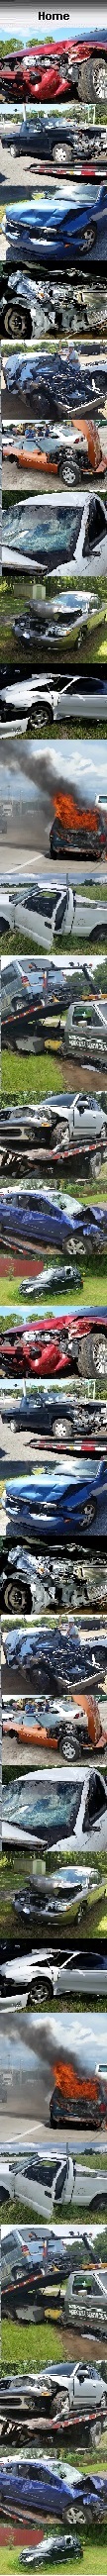 Florida Junk Cars for Cash and Parts